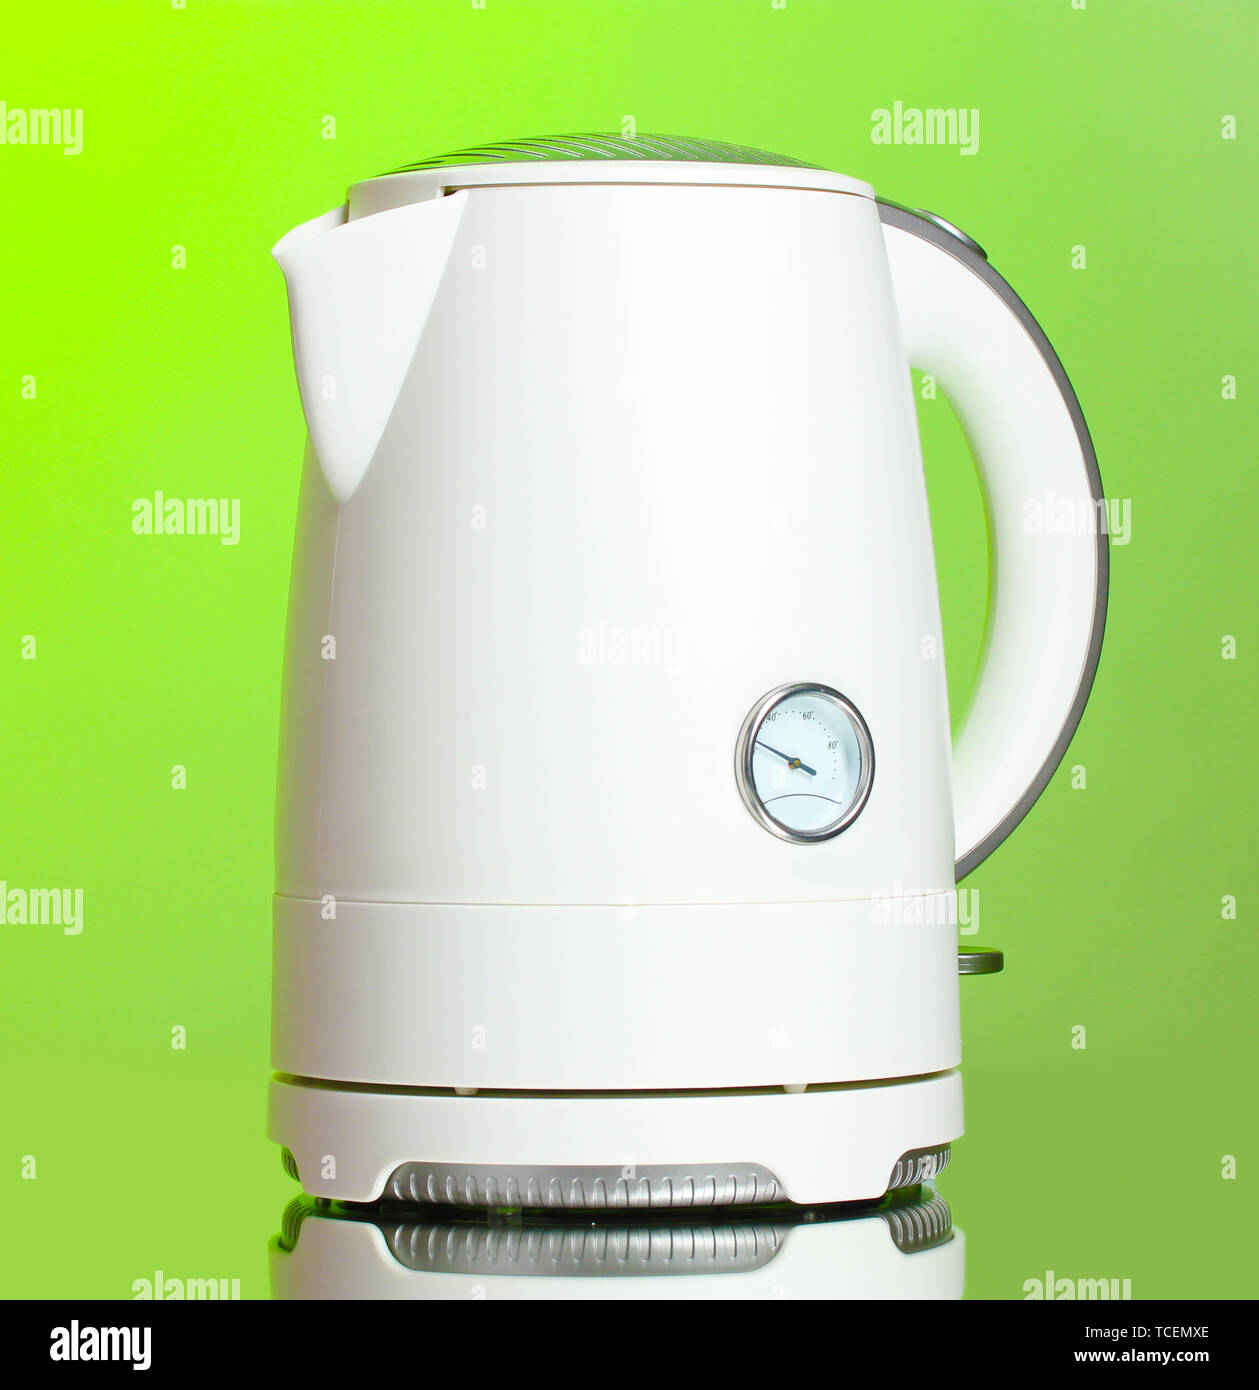 https://c8.alamy.com/comp/TCEMXE/white-electric-kettle-on-green-TCEMXE.jpg